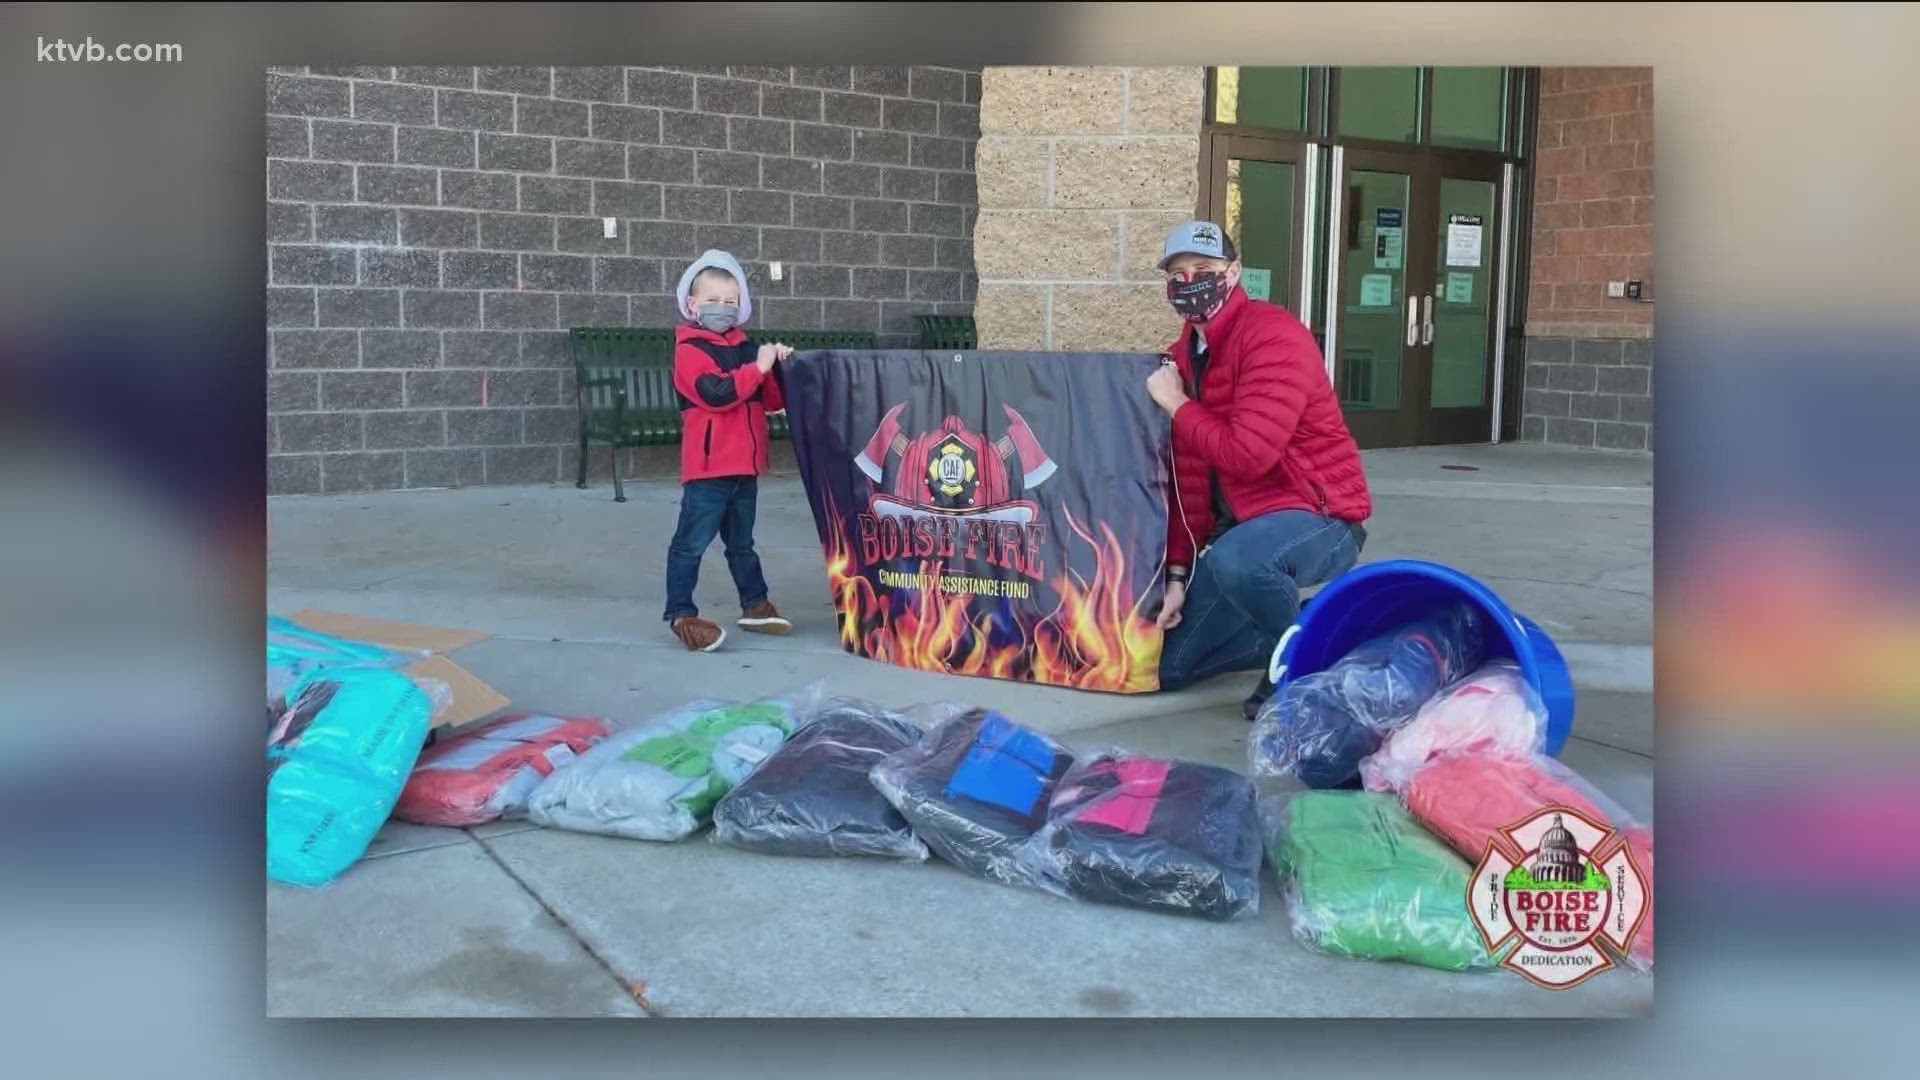 Plus, 'Operation Warm' collects winter clothing for those in need.